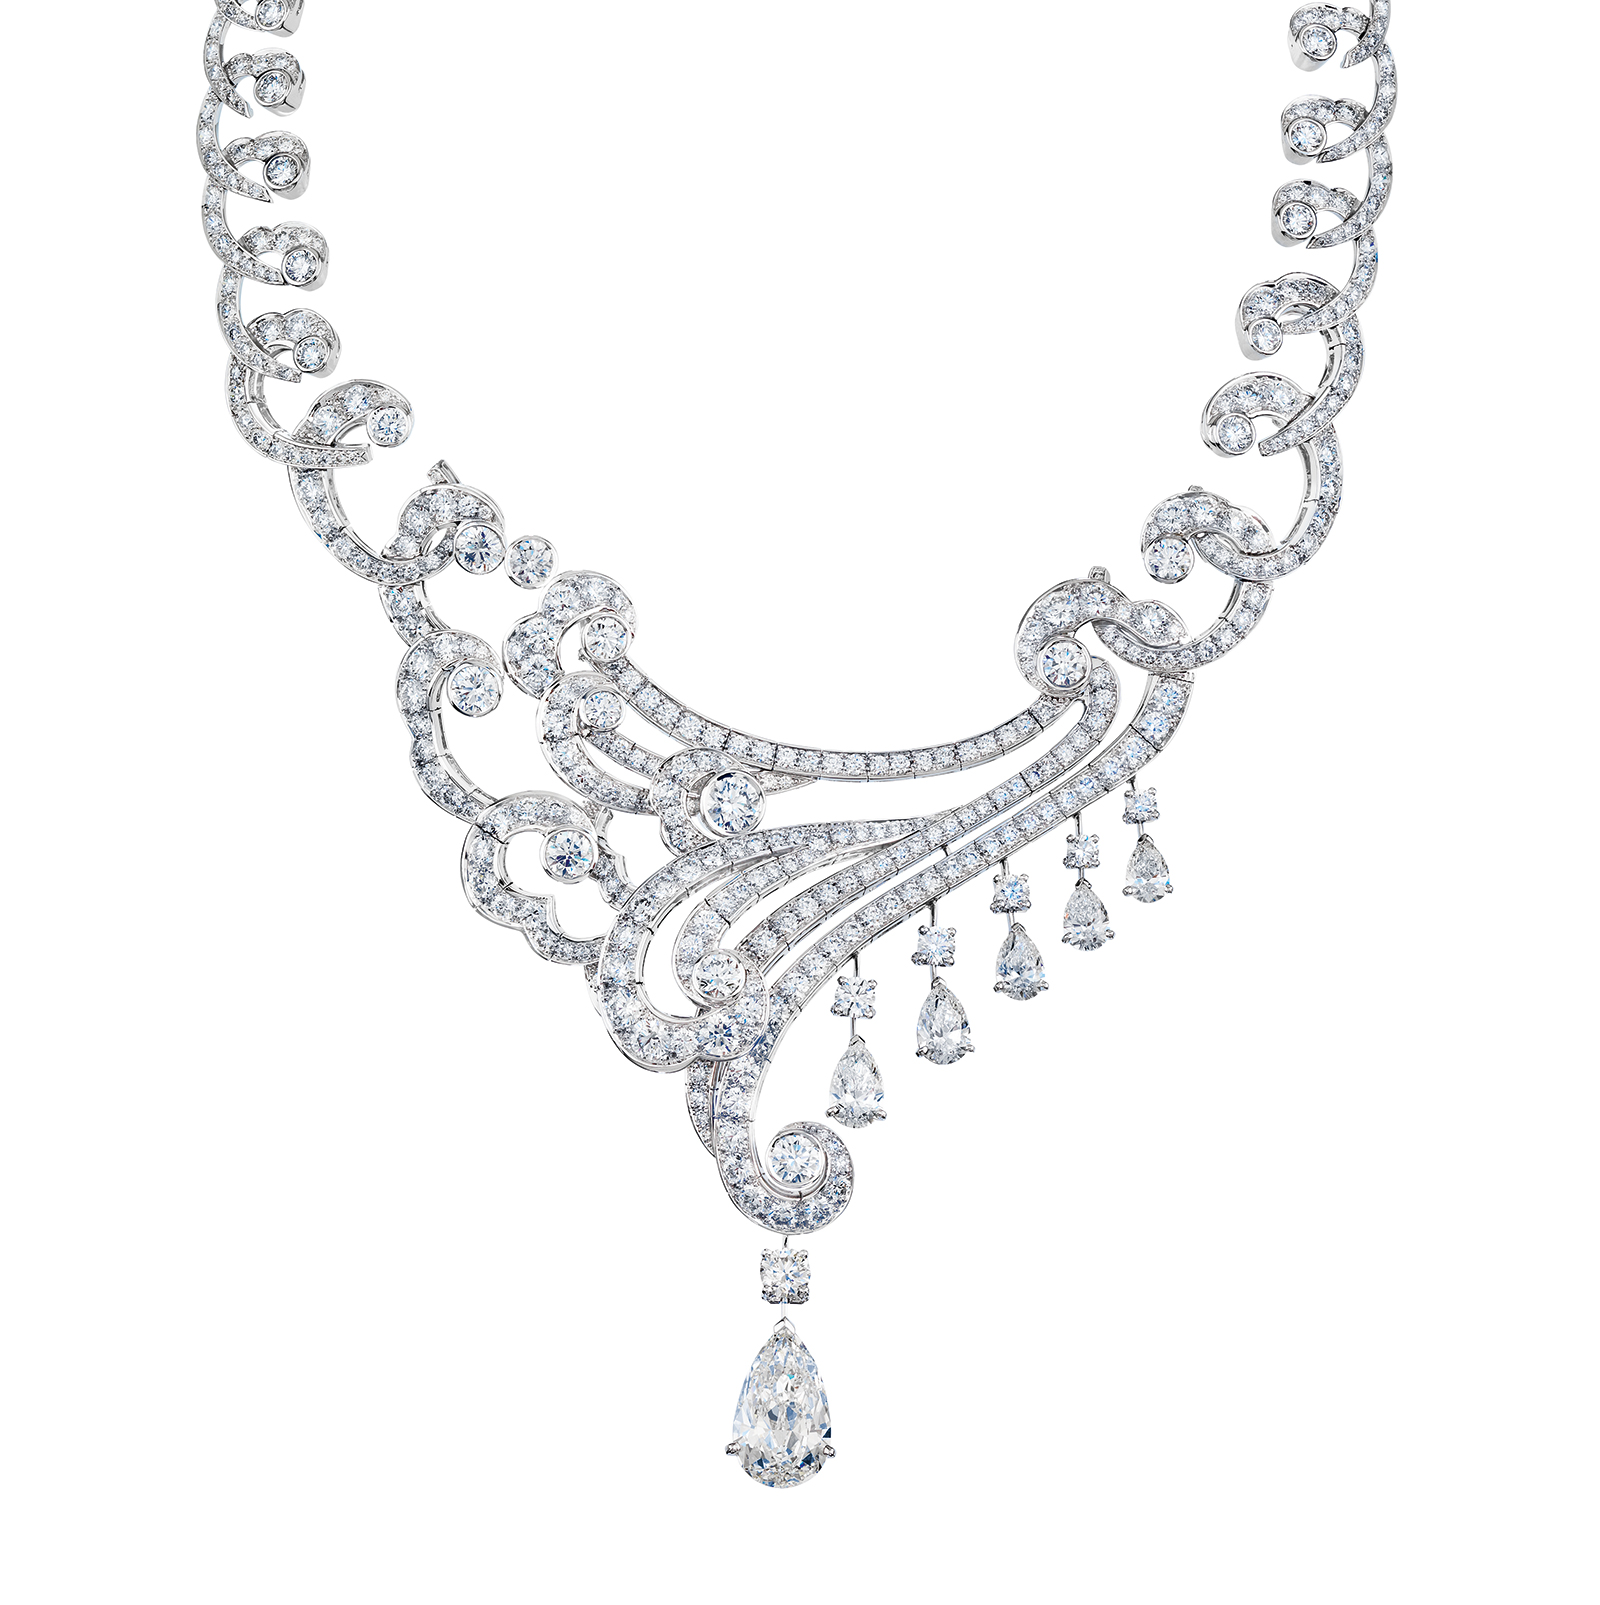 The Sirocco Necklace From De Beers